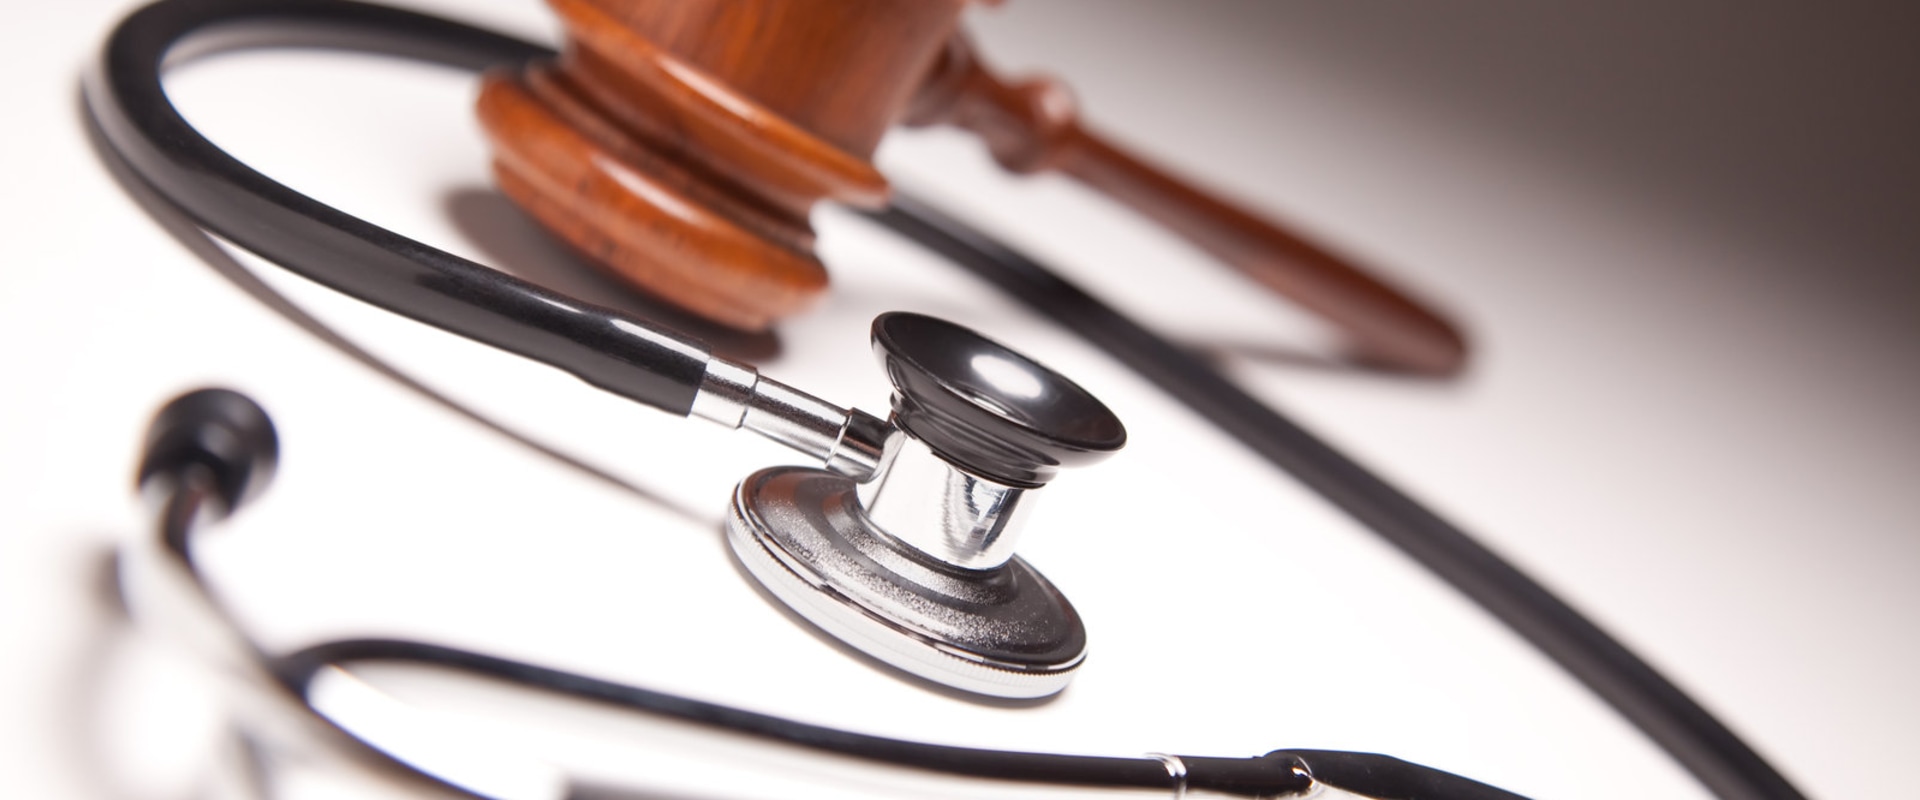 Misdiagnosed By A Medical Professional In Atlanta: Why You Need A Medical Malpractice Attorney For This